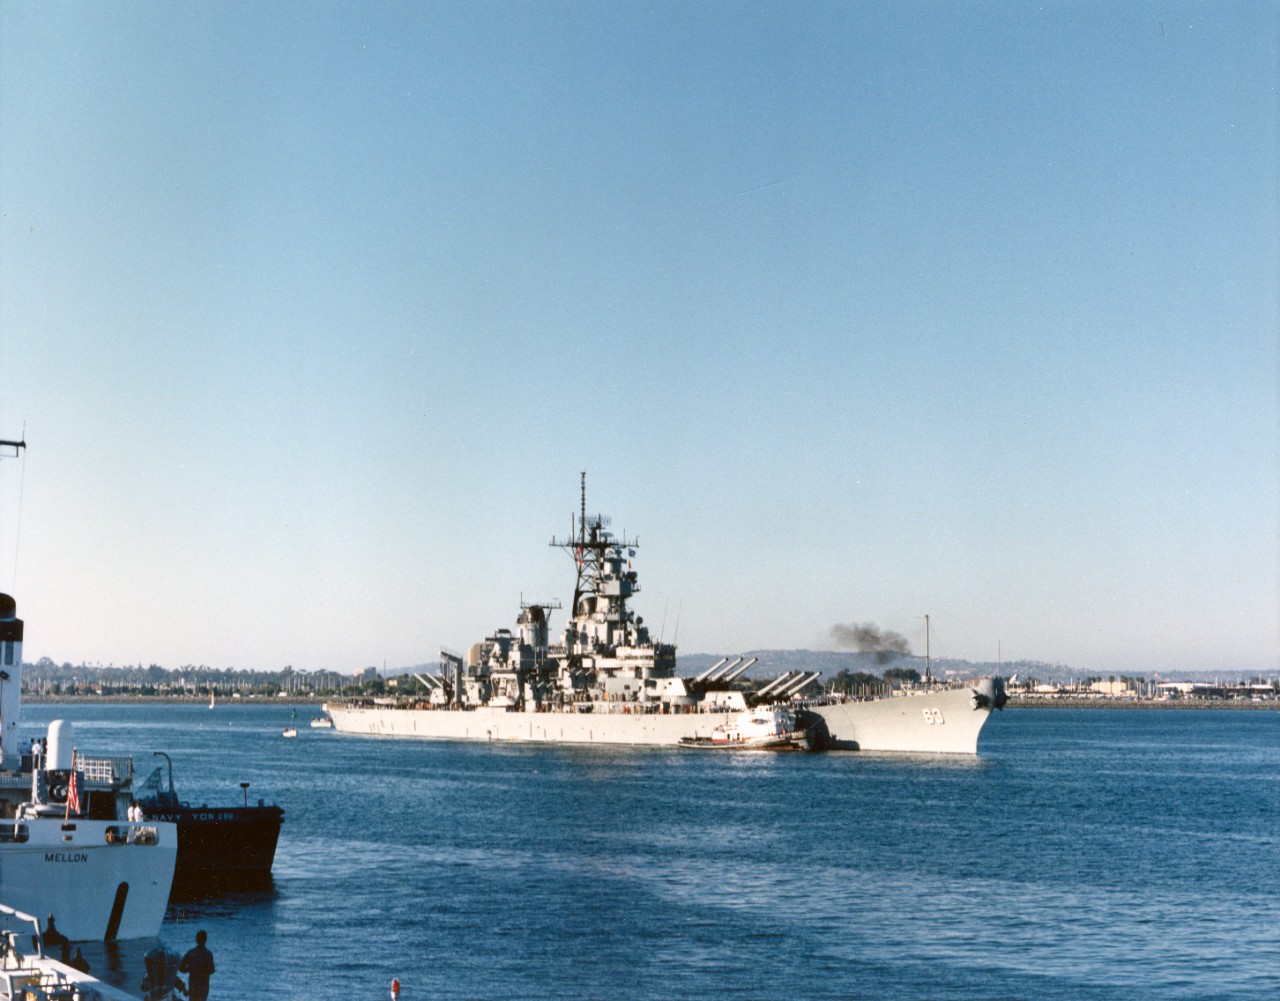 A commercial tug escorts the battleship USS Missouri (BB-63) as the ship prepares to dock at Naval Air Station, North Island.